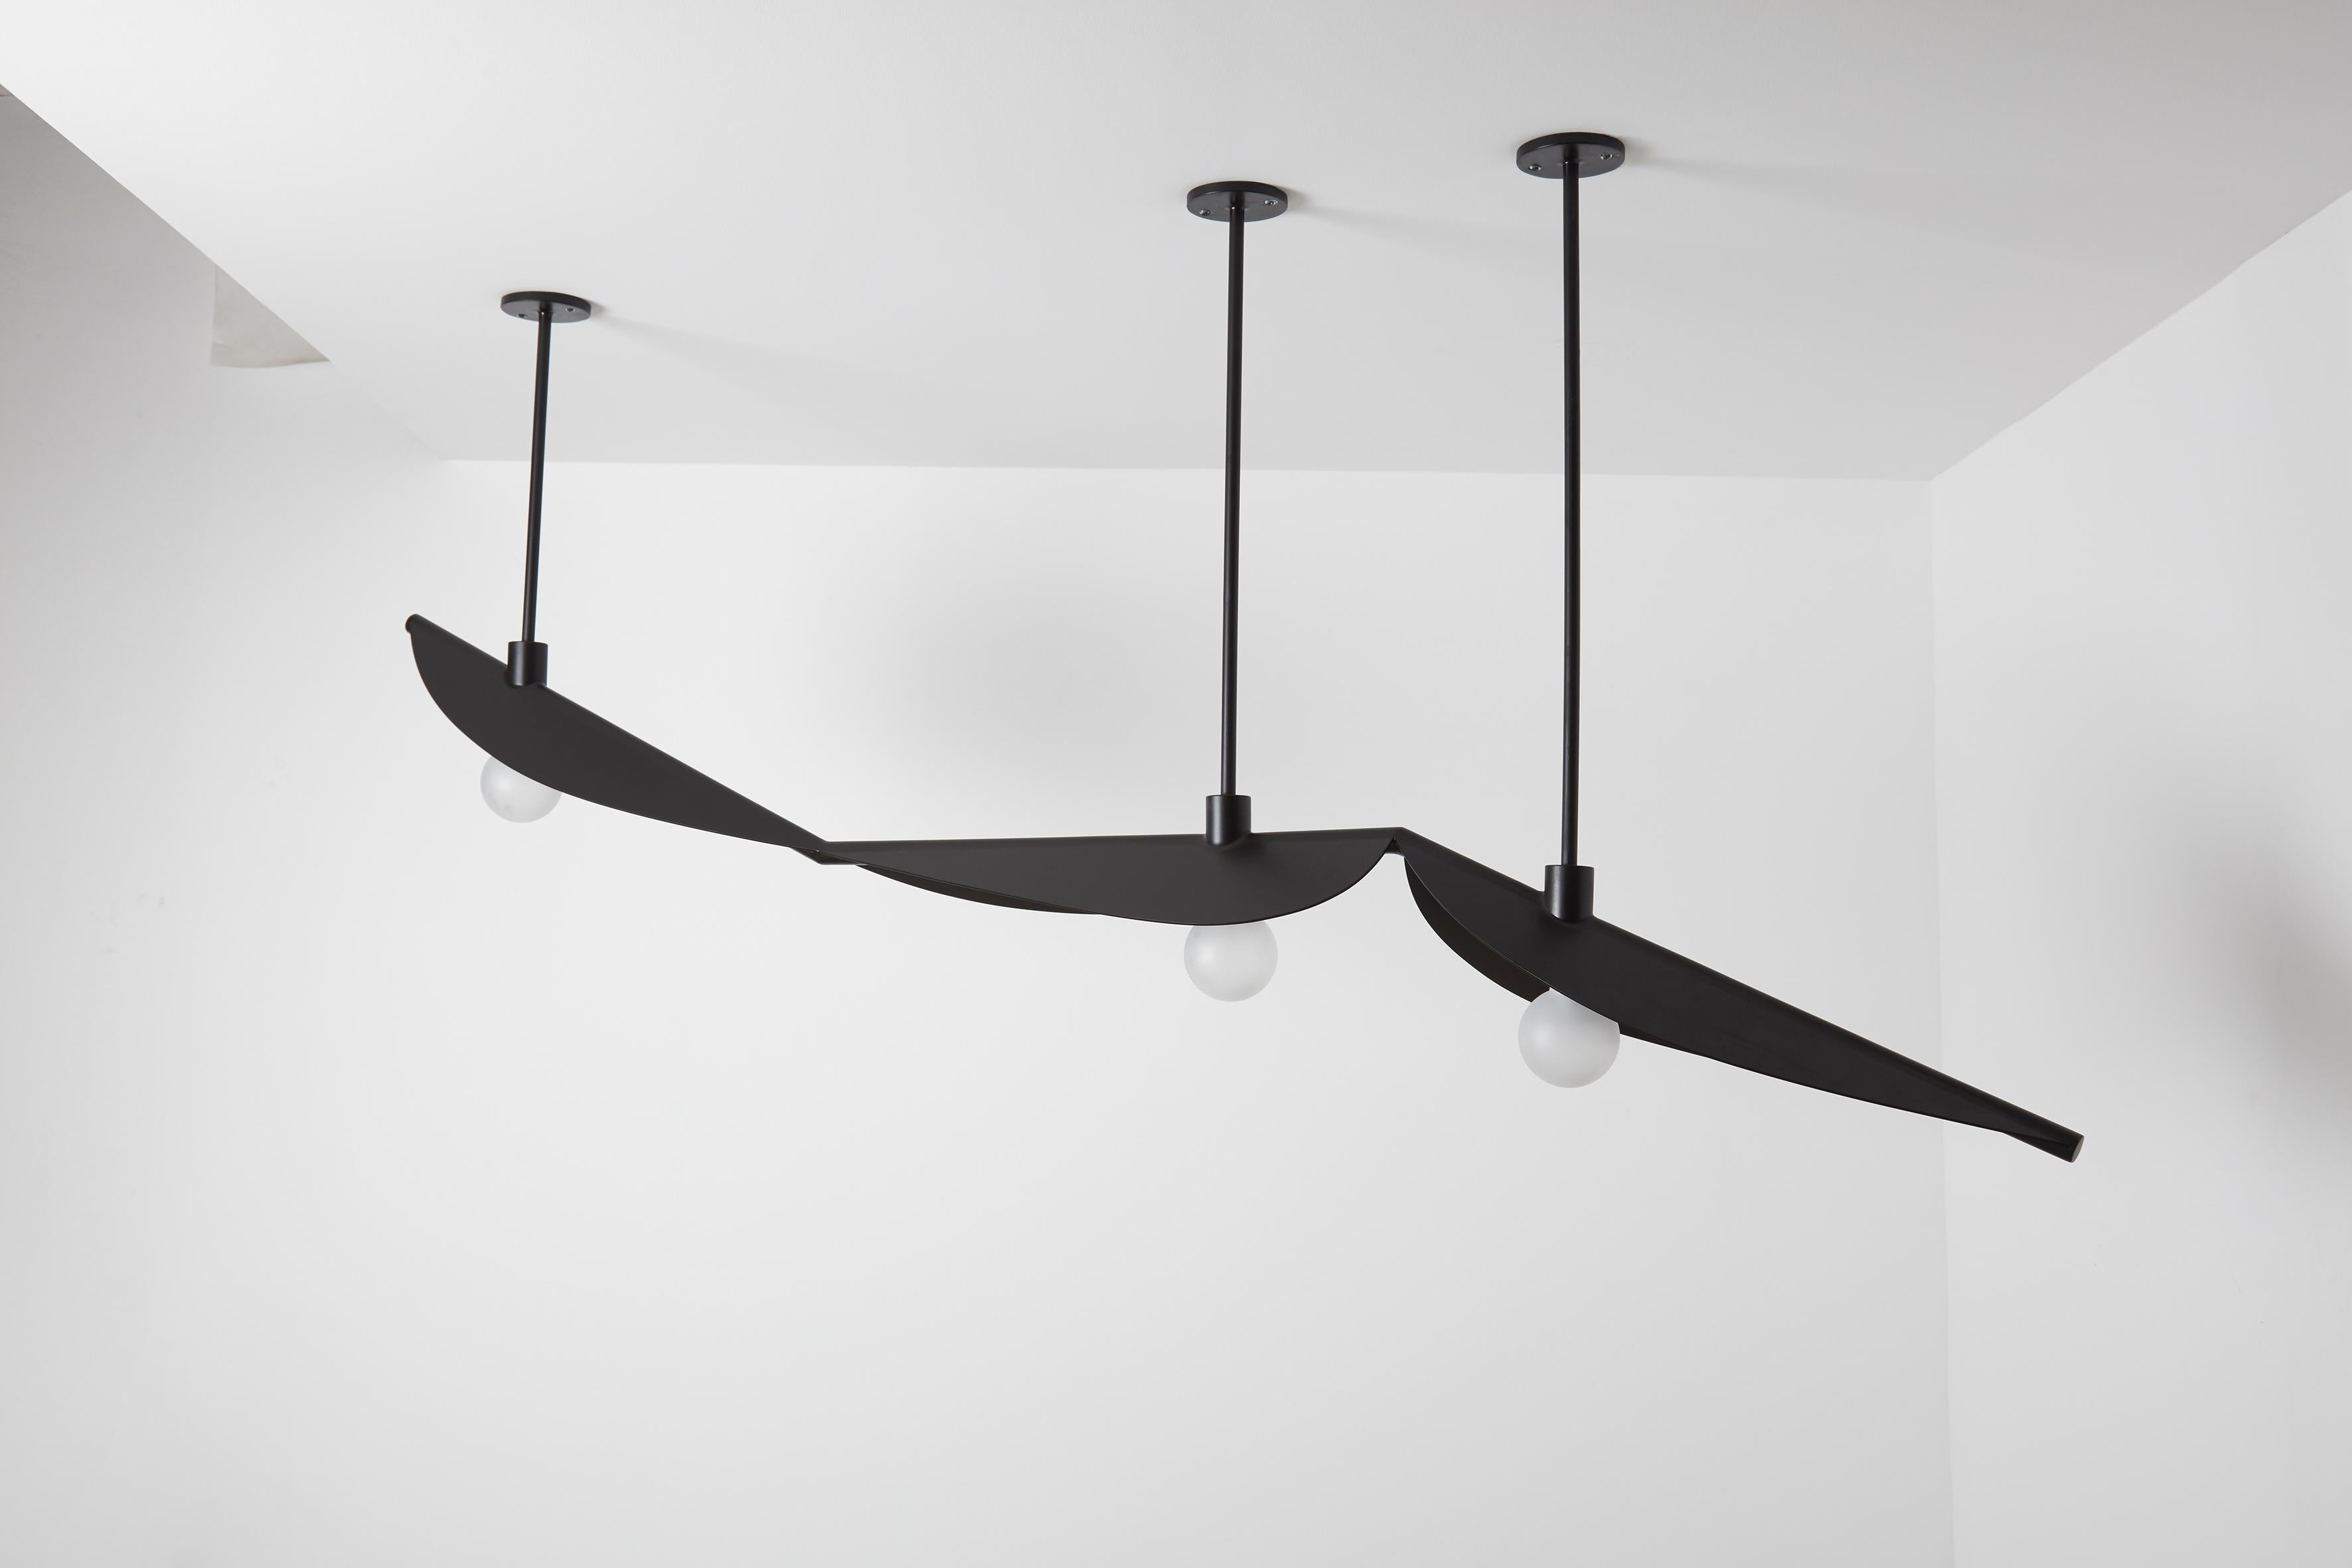 Feuillage trio ceiling mounted Black - Carla Baz
Dimensions: L 220 x W 30 x H 85 cm
Weight: 15 kg
Material: Black steel

Feuillage is a lighting installation composed of fine metal leaves delicately welded on a branch holding frosted glass